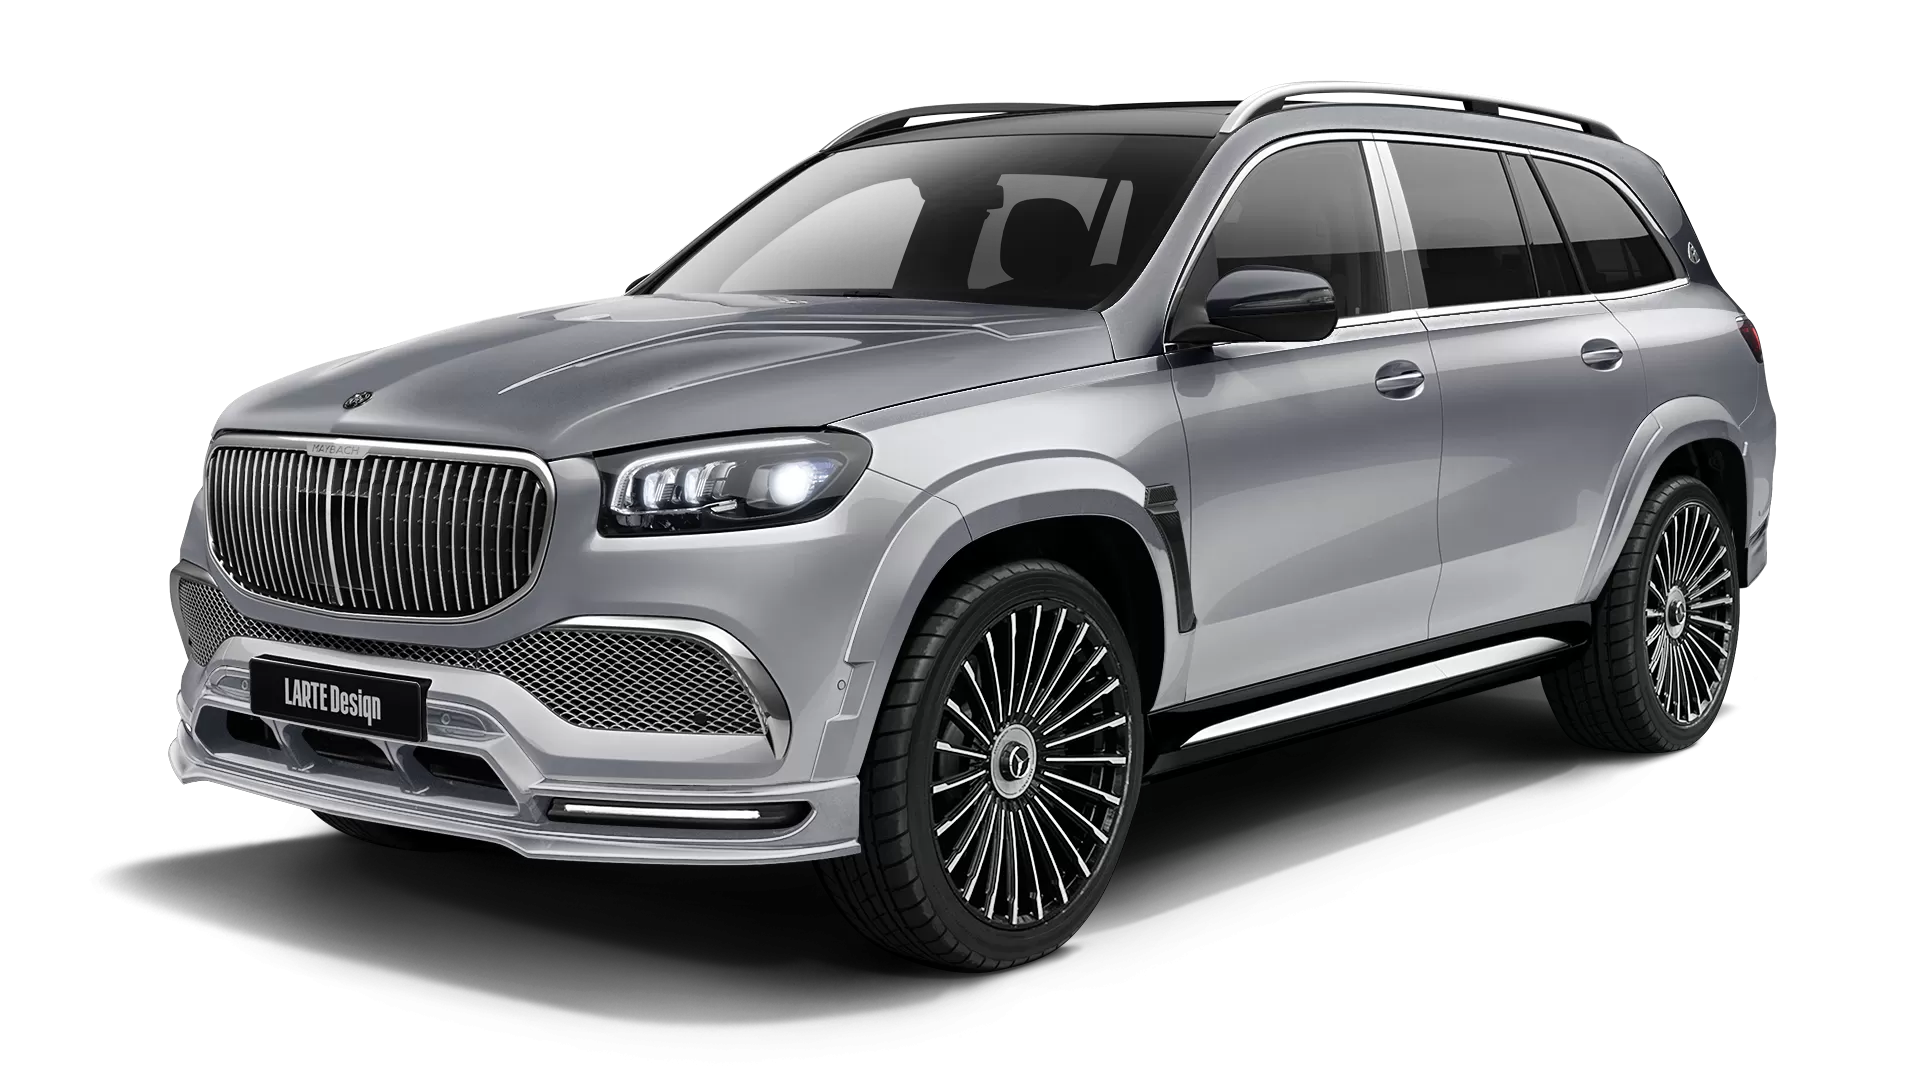 Mercedes Maybach GLS 600 with painted body kit: front view shown in High Tech Silver & Selenite Grey